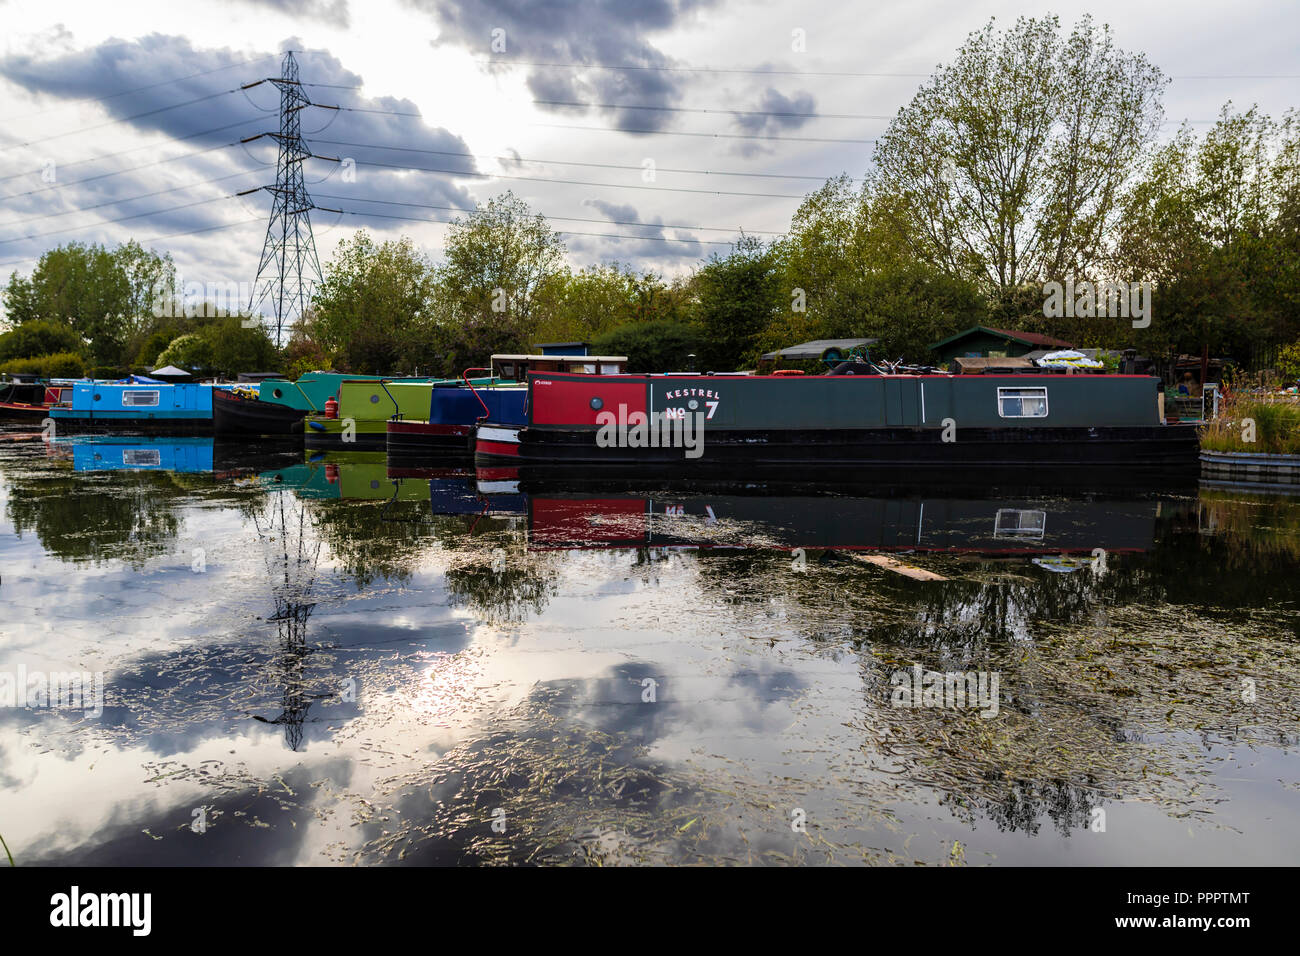 London, United Kingdom - September 15, 2018: View of houseboats docked on the river Thames alongside the Lea Valley Walk. Stock Photo